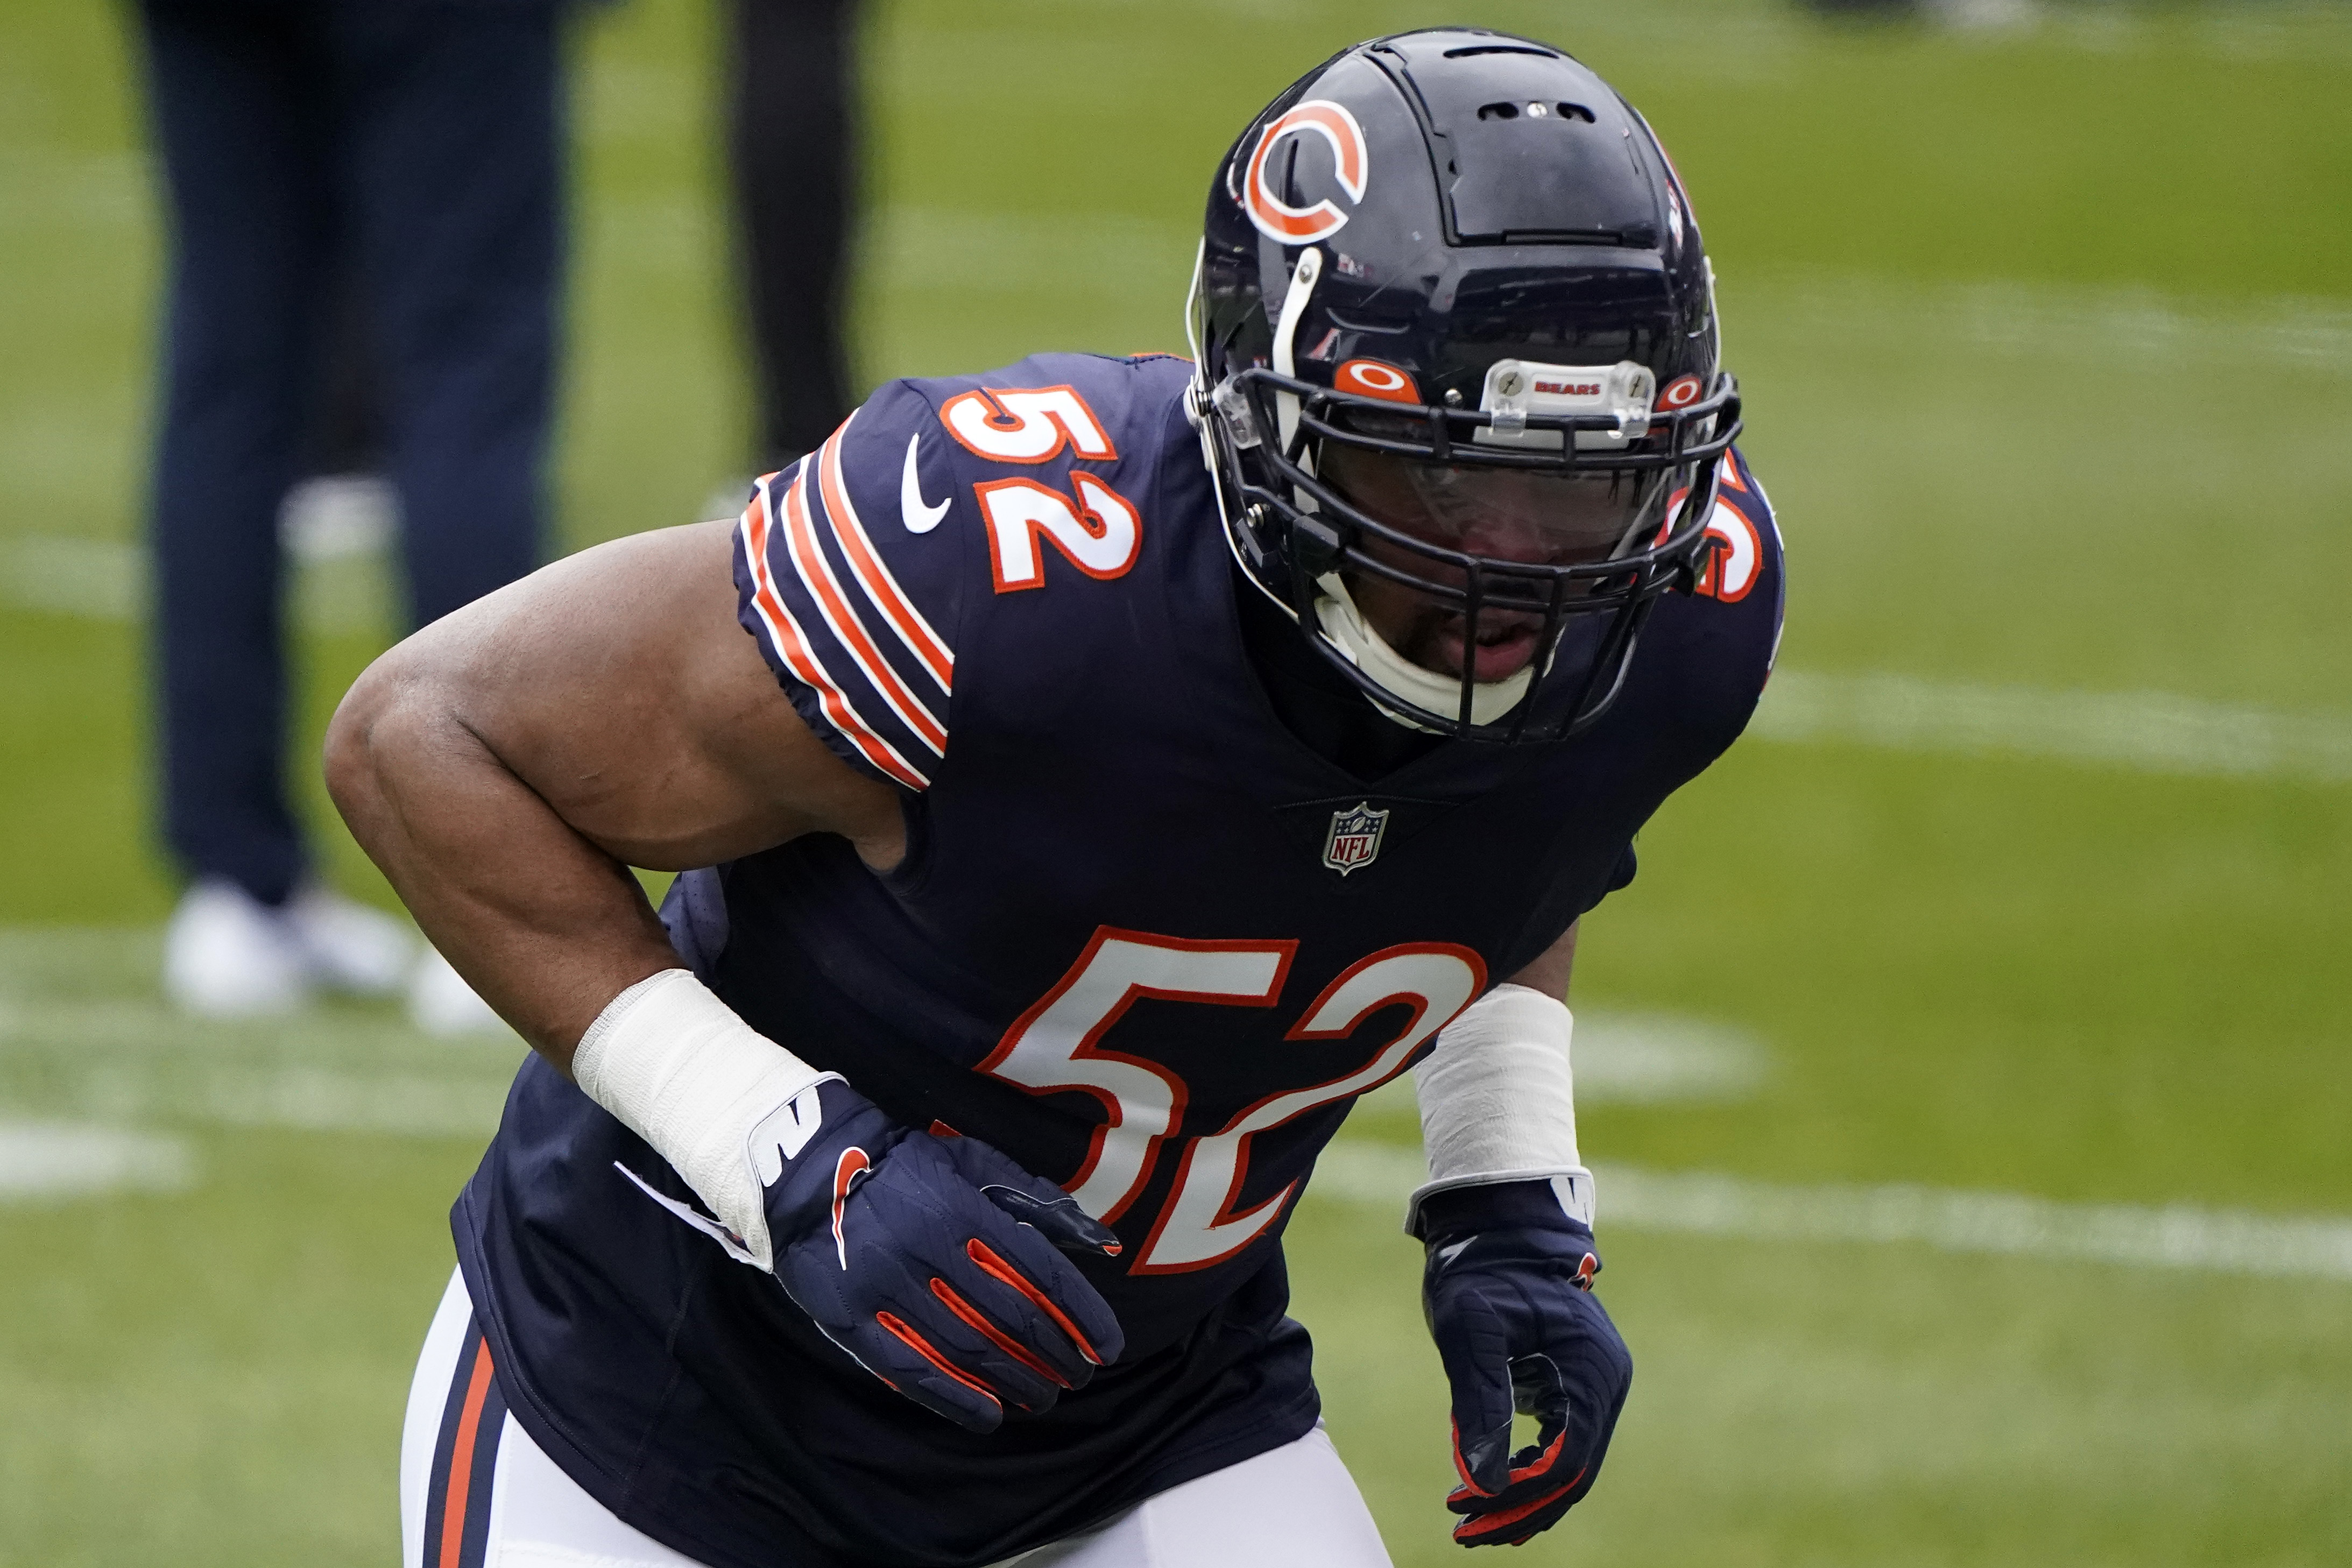 Dec 6, 2020; Chicago, Illinois, USA; Chicago Bears outside linebacker Khalil Mack (52) practices before the game against the Detroit Lions at Soldier Field. Mandatory Credit: Mike Dinovo-USA TODAY Sports